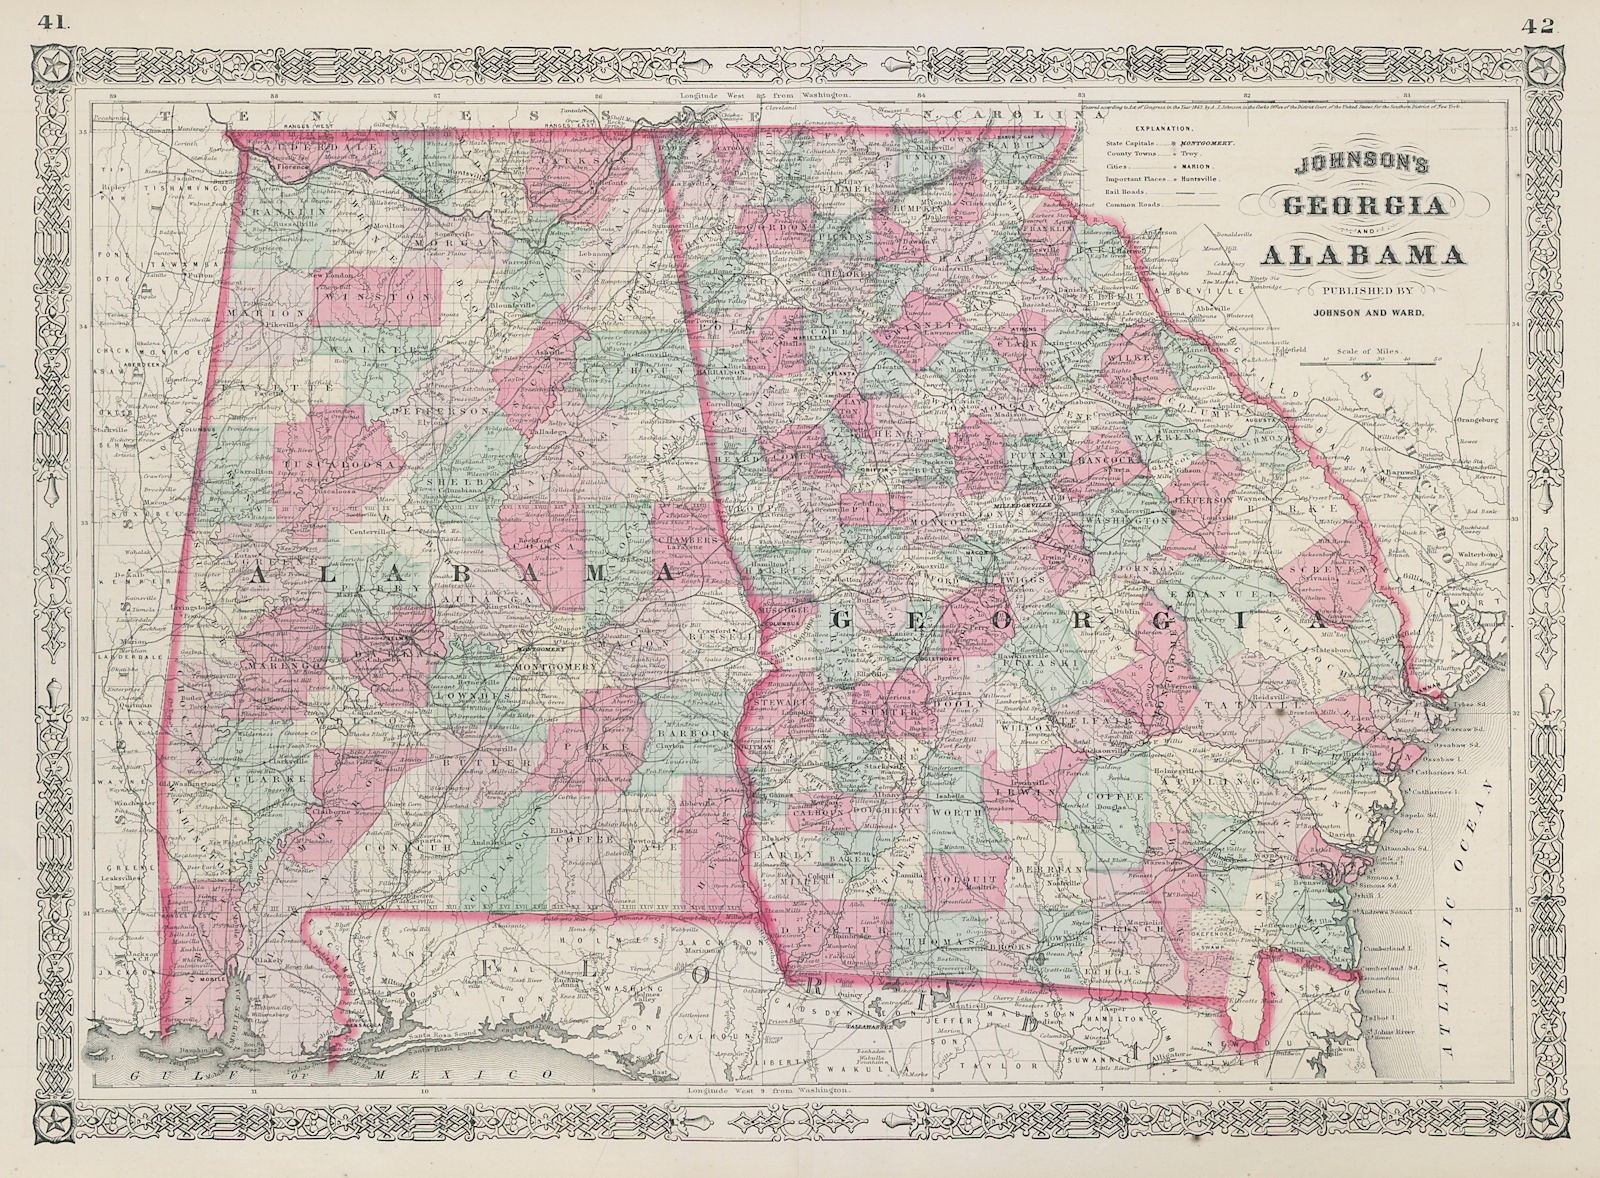 Johnson's Georgia & Alabama. US state map showing counties 1865 old